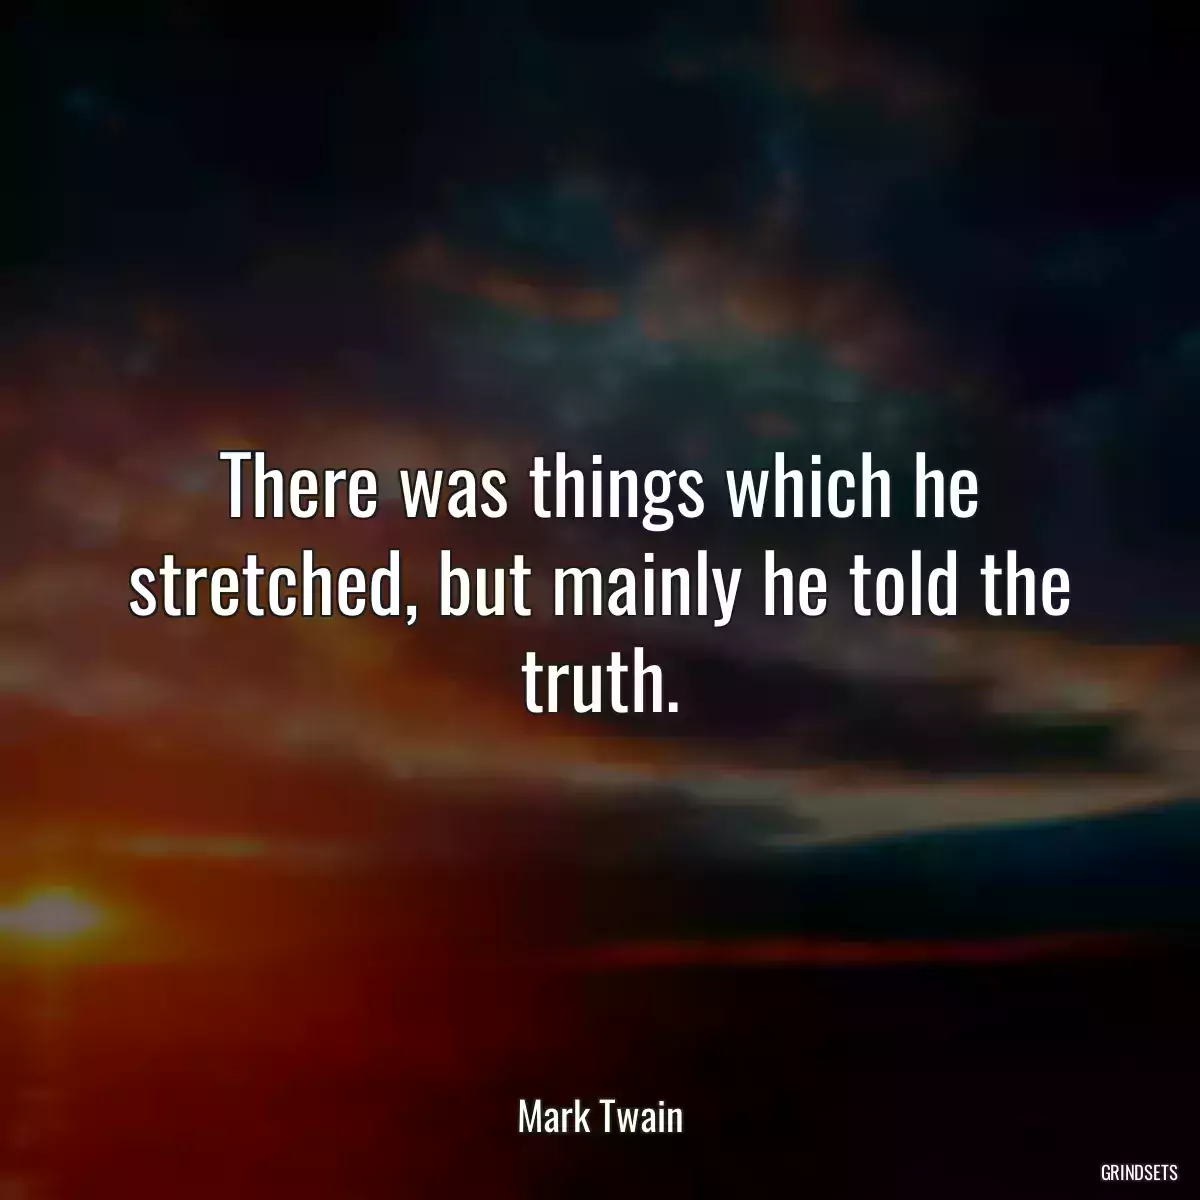 There was things which he stretched, but mainly he told the truth.